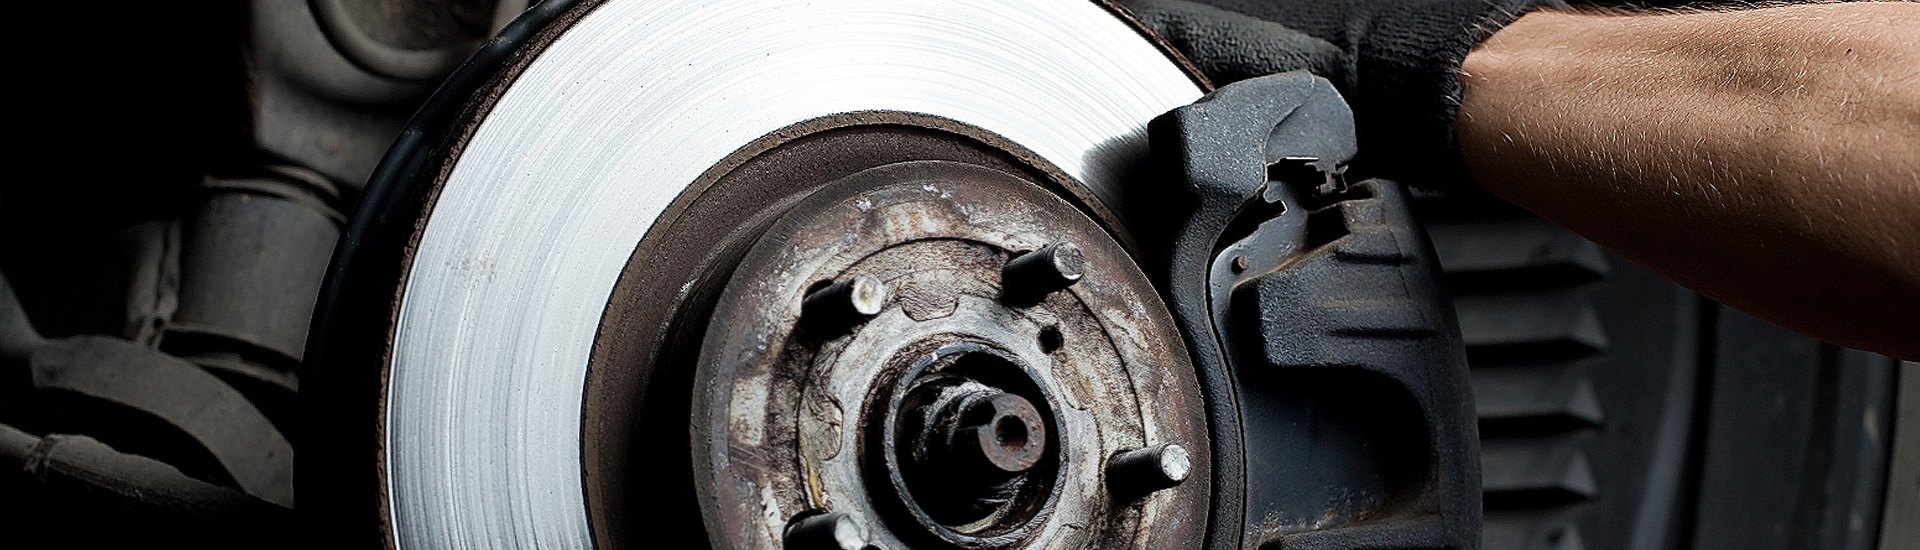 How To Replace Disc Brake Pads